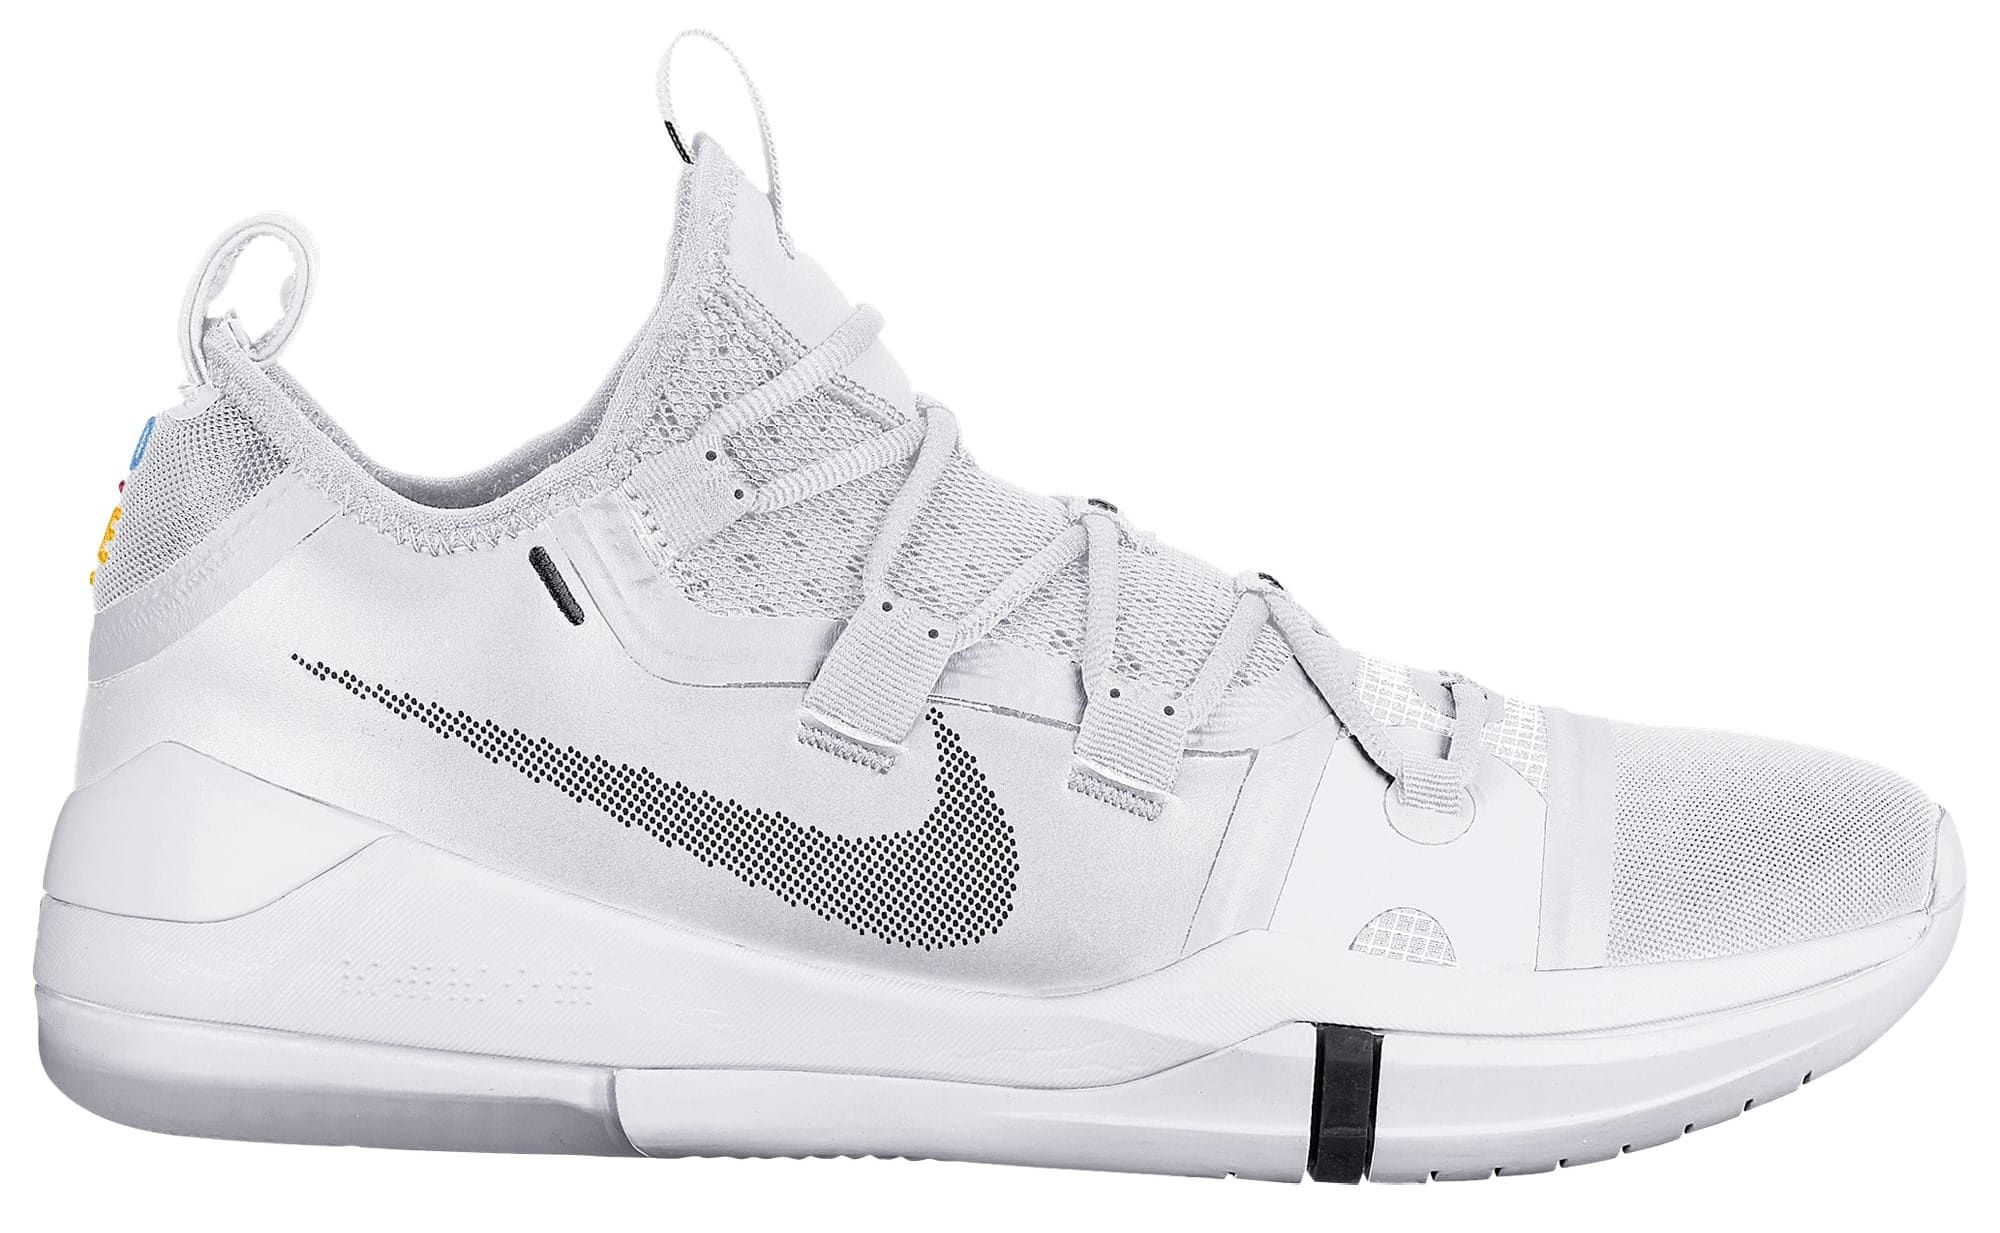 nike-kobe-ad-color-pack-white-lateral